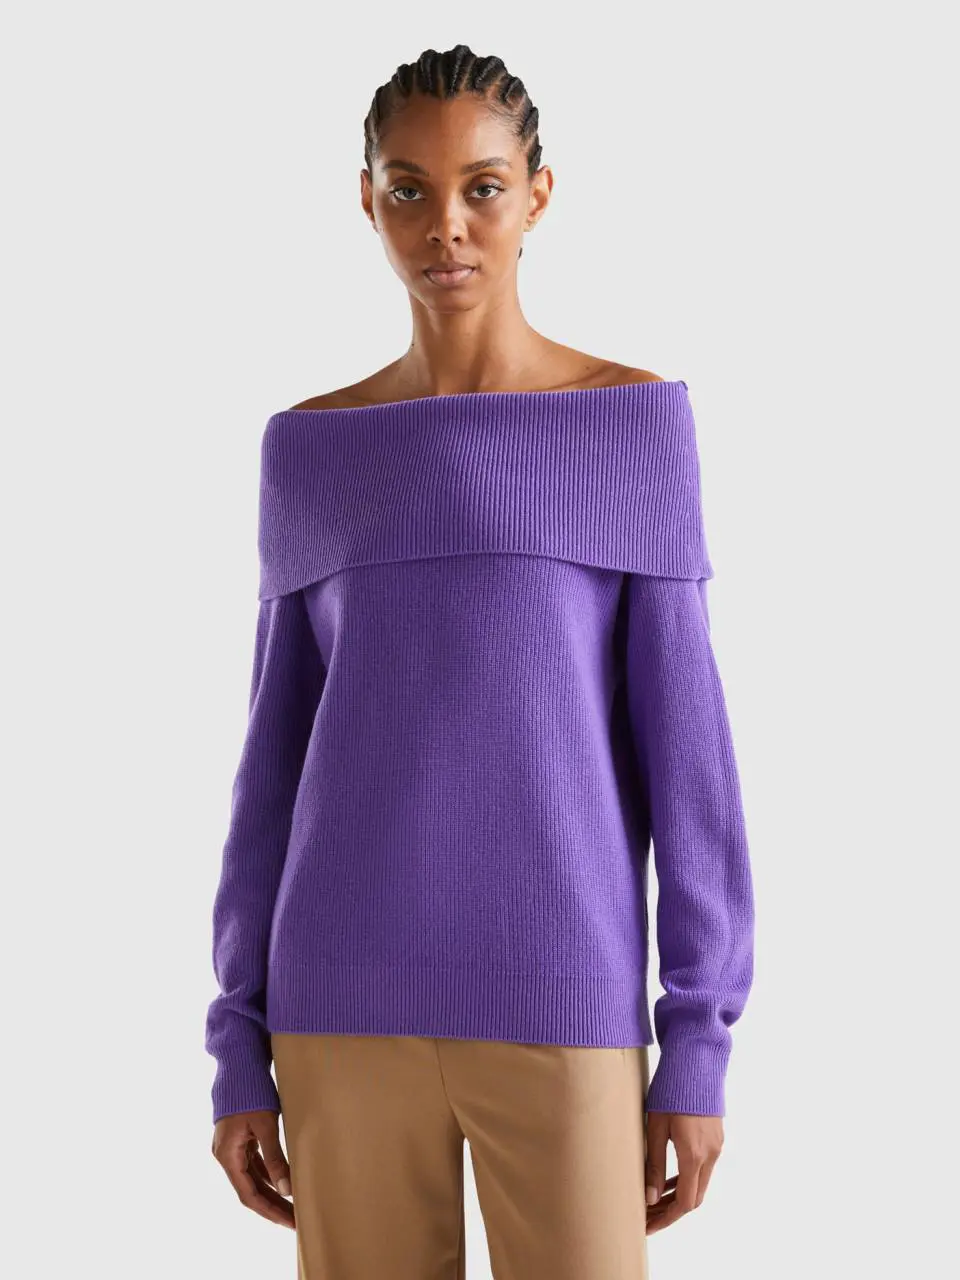 Benetton sweater with bare shoulders. 1